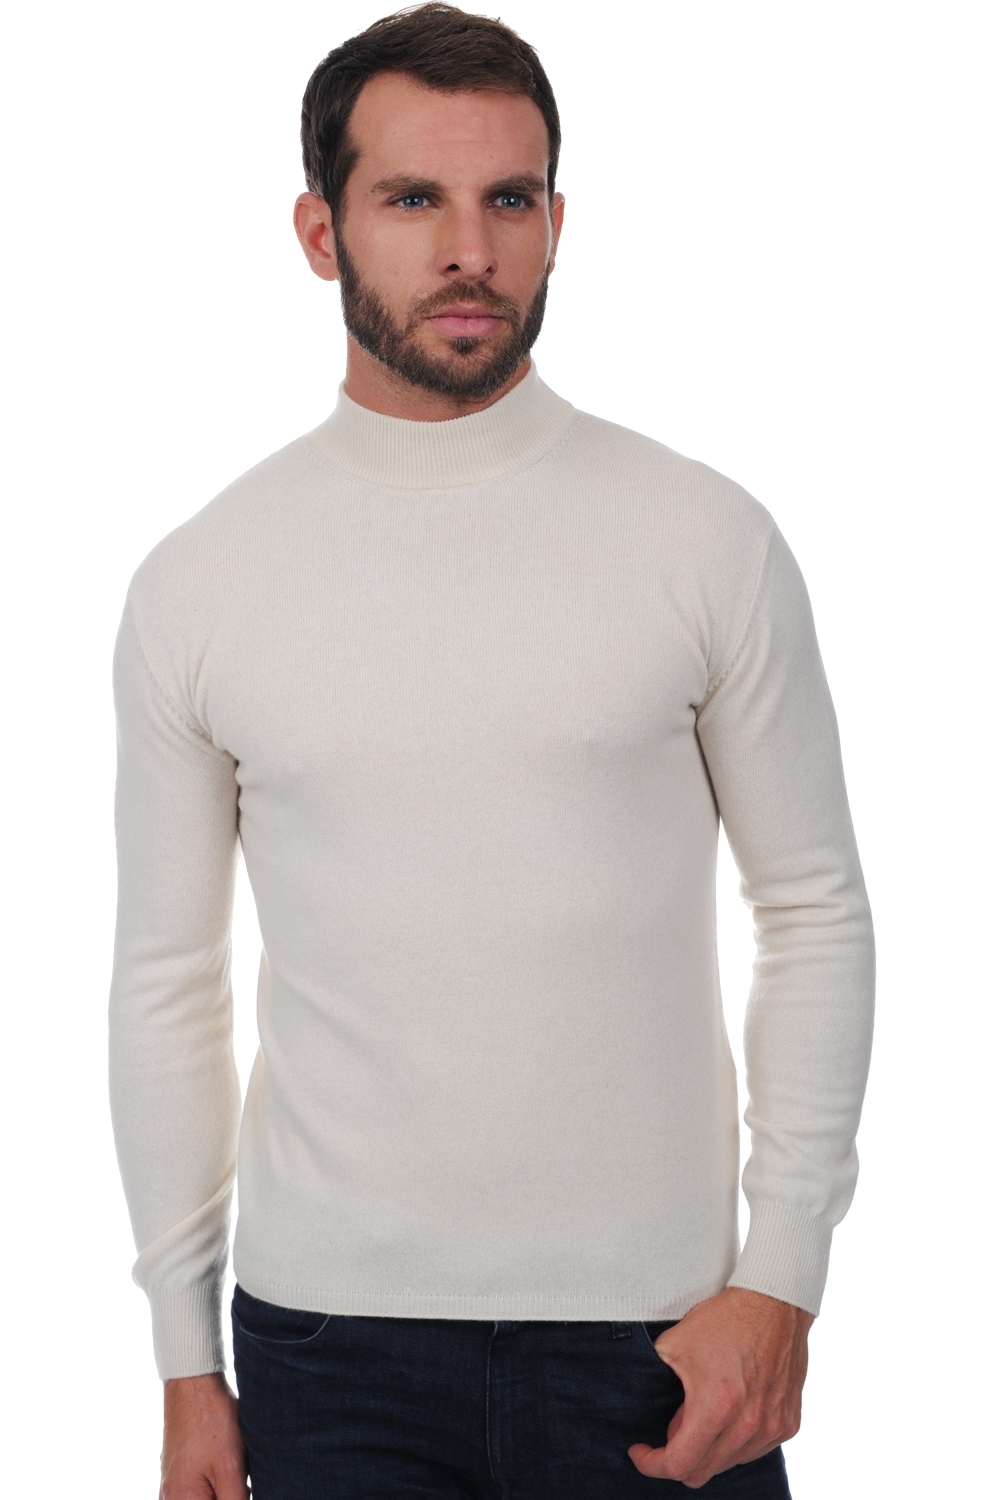 Cachemire pull homme frederic natural ecru 2xl